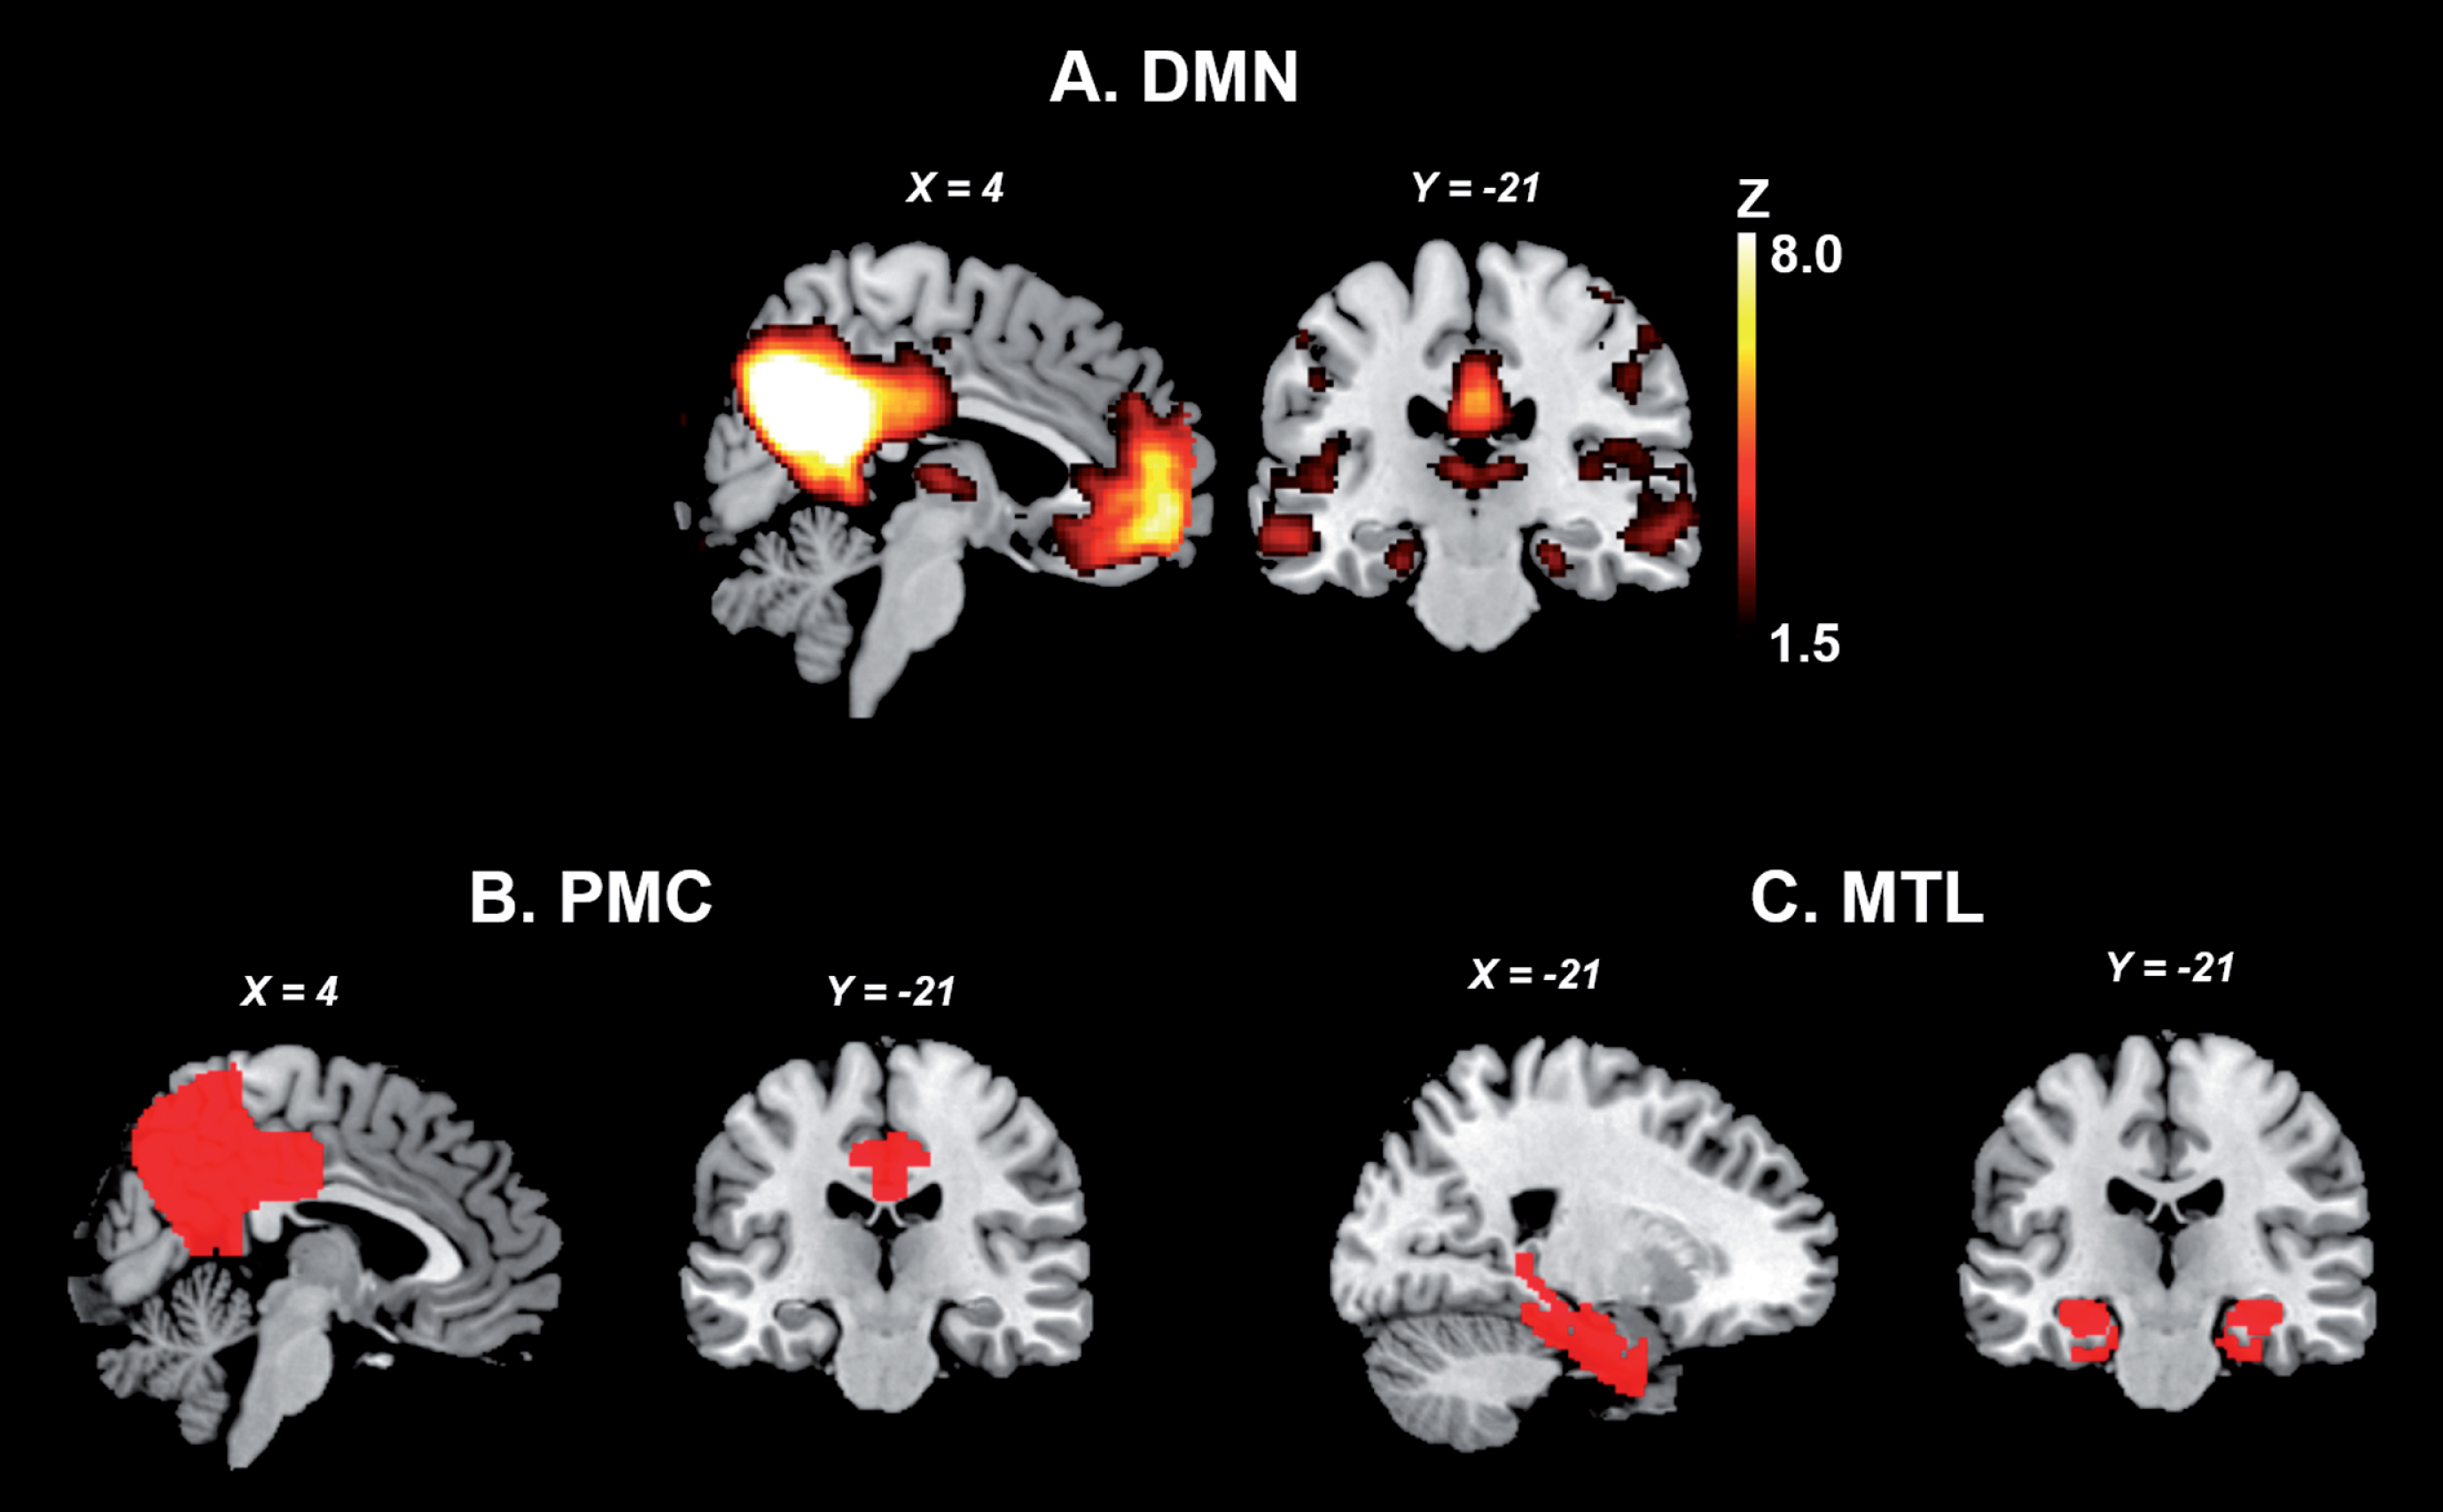 The MTL and PMC of the DMN. A. Publicly available spatial map of the DMN derived from an independent component analysis on resting-state fMRI data of 36 healthy subjects (https://www.fmrib.ox.ac.uk/datasets/brainmap+rsns/). B and C show the location of the PMC and MTL, respectively (Harvard-Oxford Cortical and Subcortical Atlas). DMN, default mode network; MTL, medial temporal lobes; PMC, parietomedial cortex.